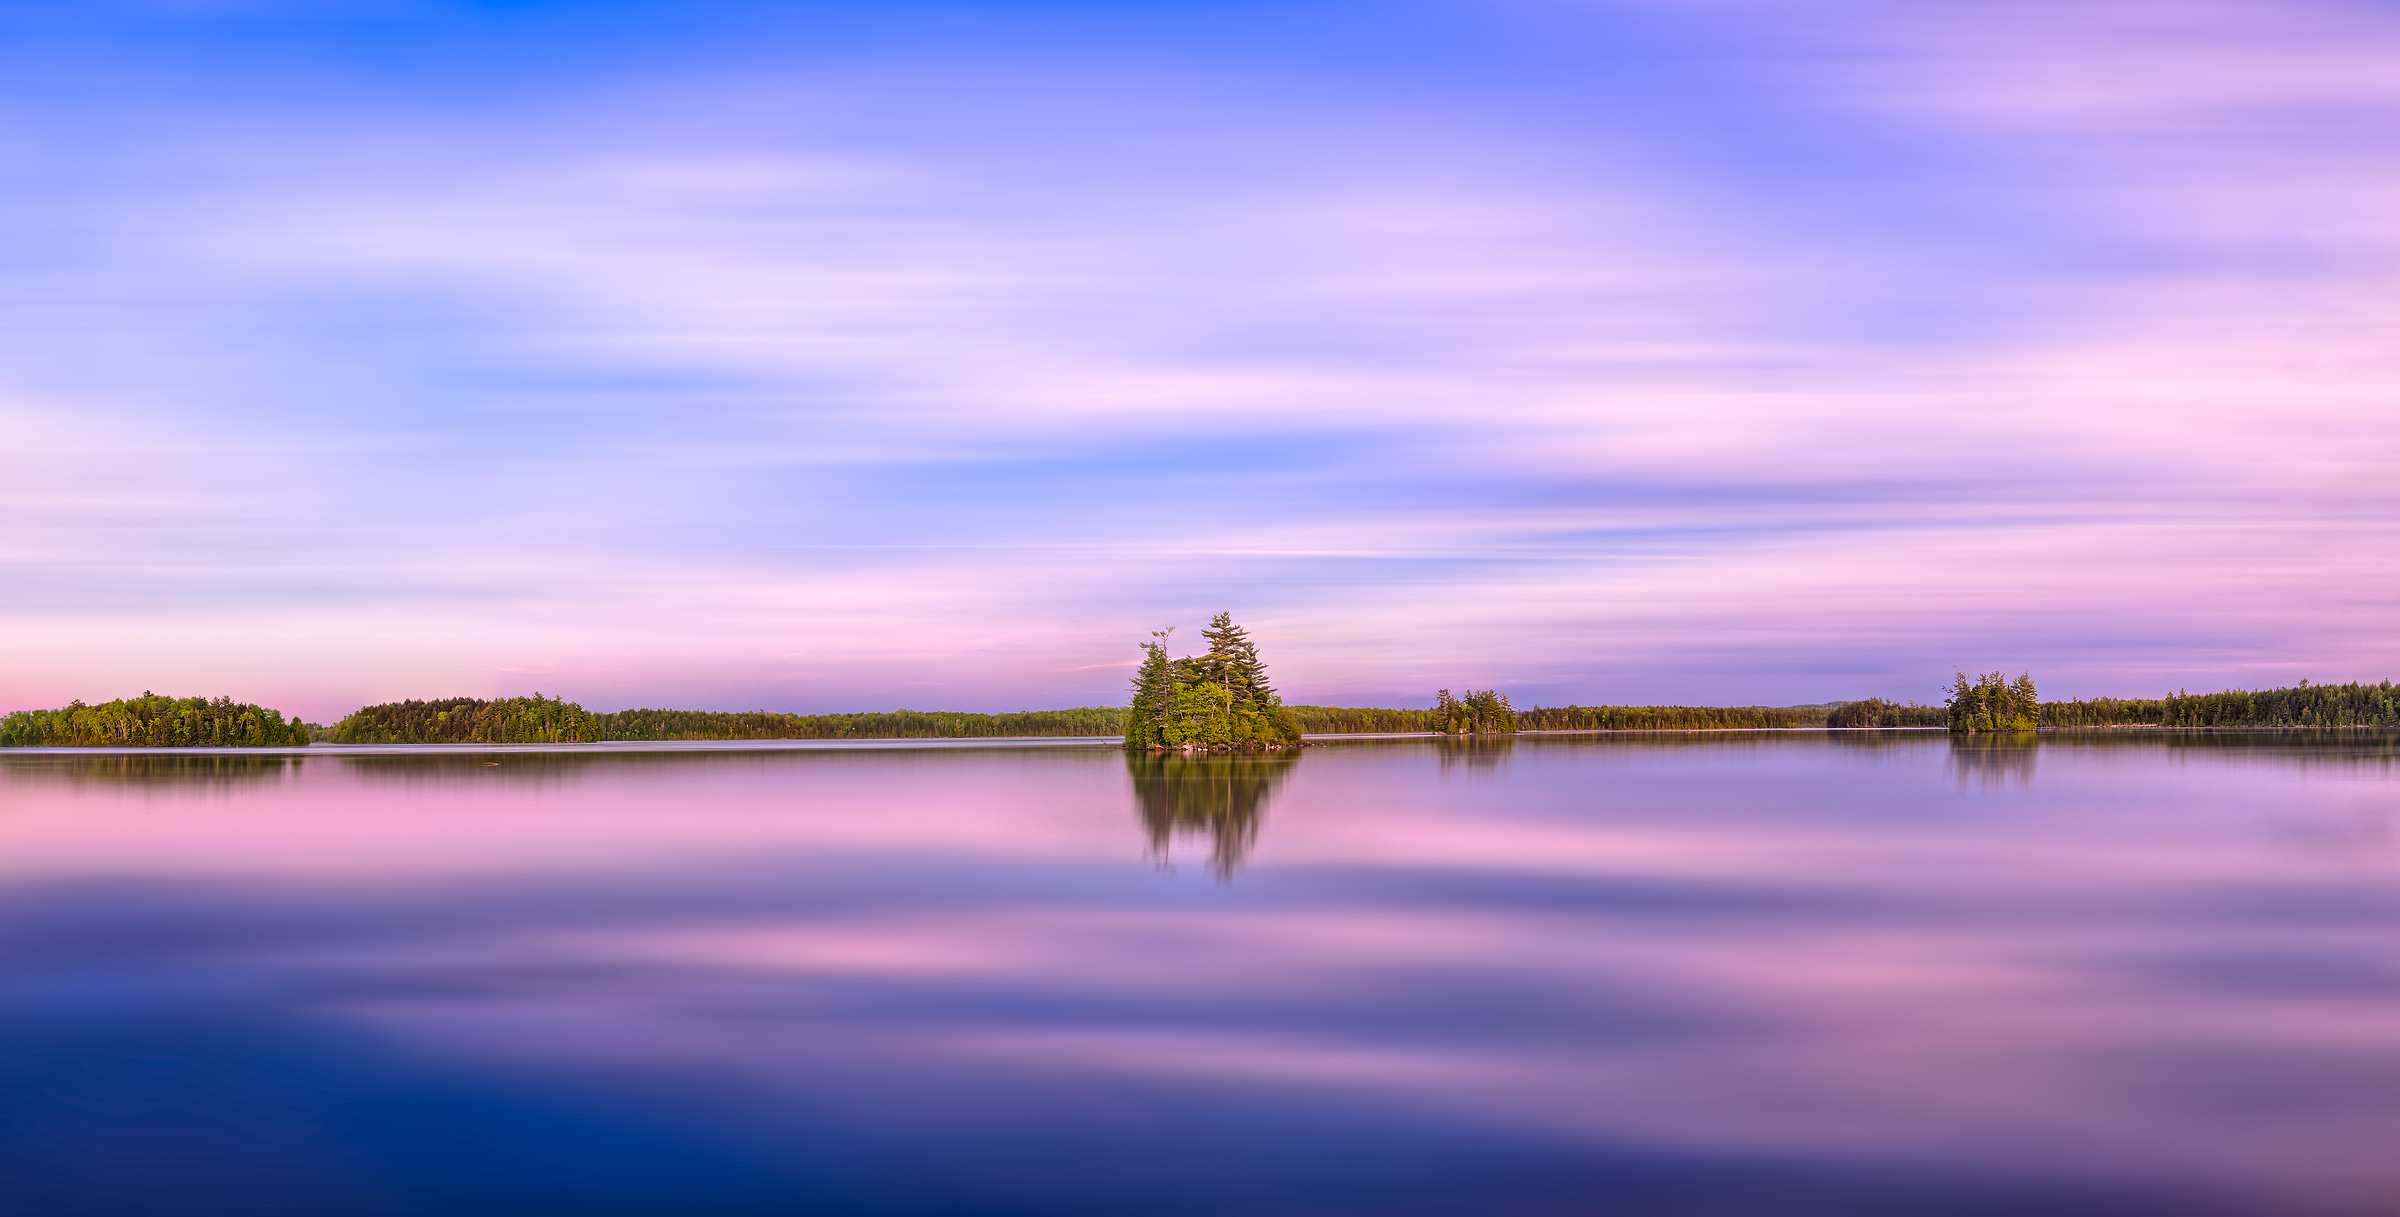 115 megapixels! A very high resolution, large-format VAST photo of sunset over Quakish Lake in New England; fine art landscape photograph created by Aaron Priest in Millinocket, Maine.